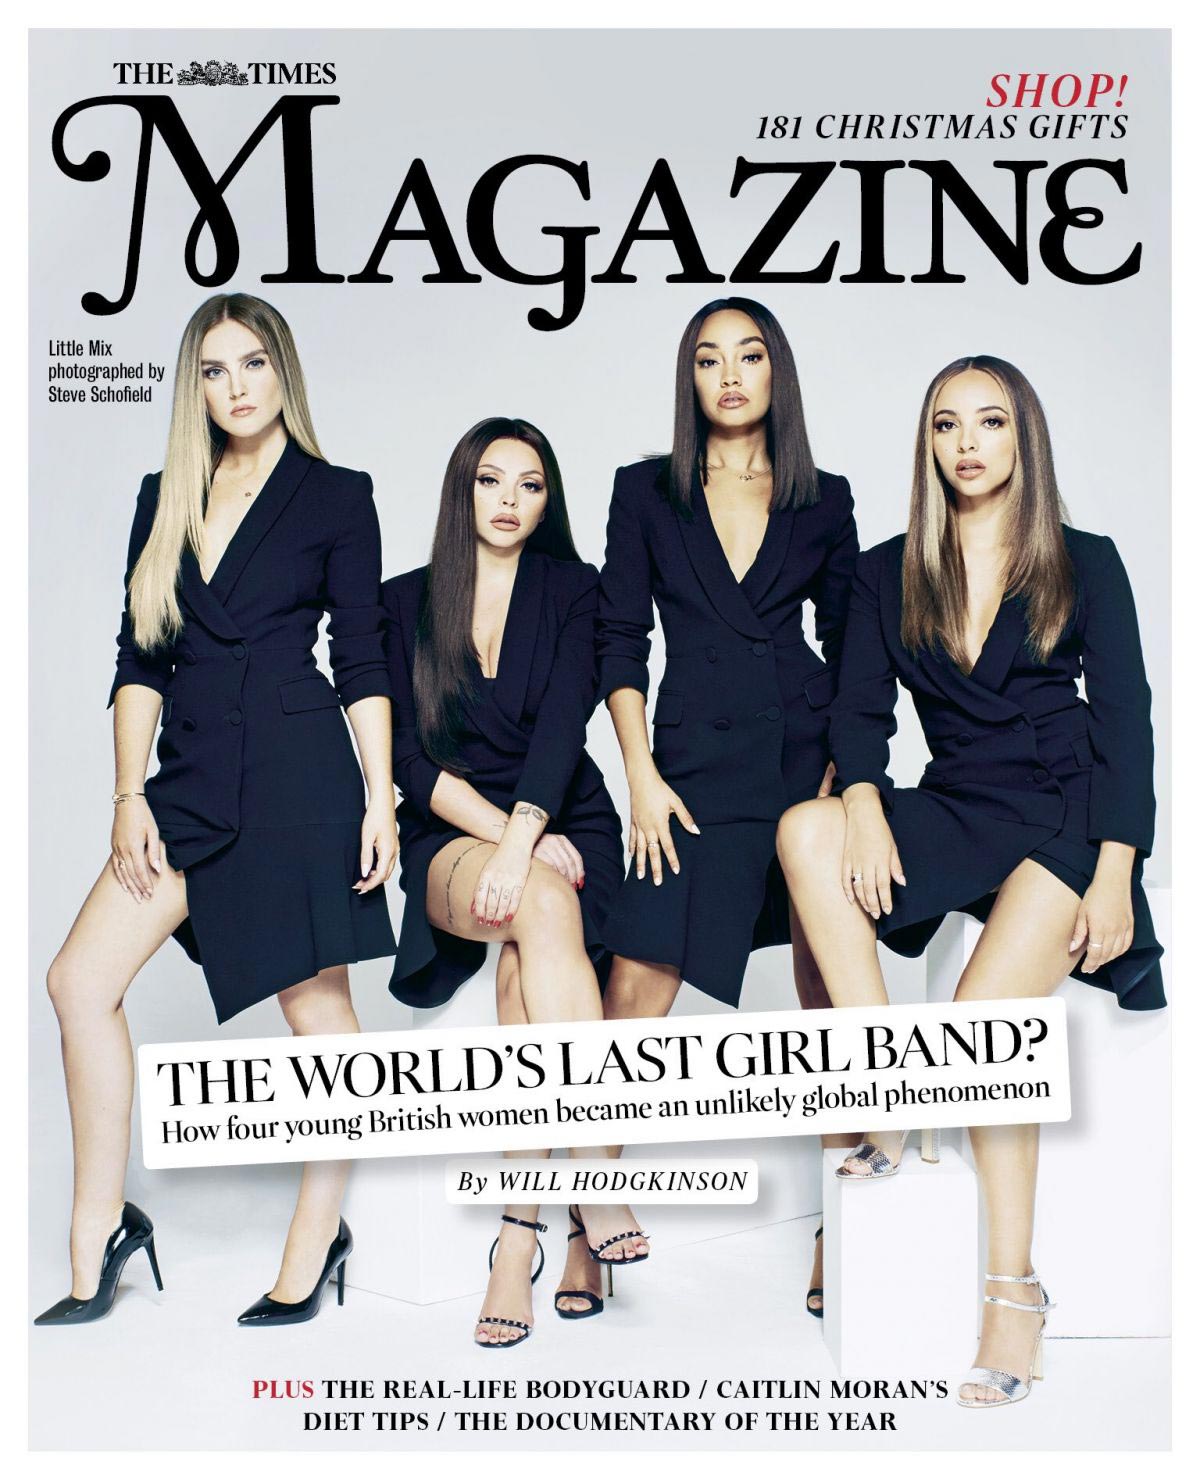 Little Mix on the Cover of Times Magazine 2018